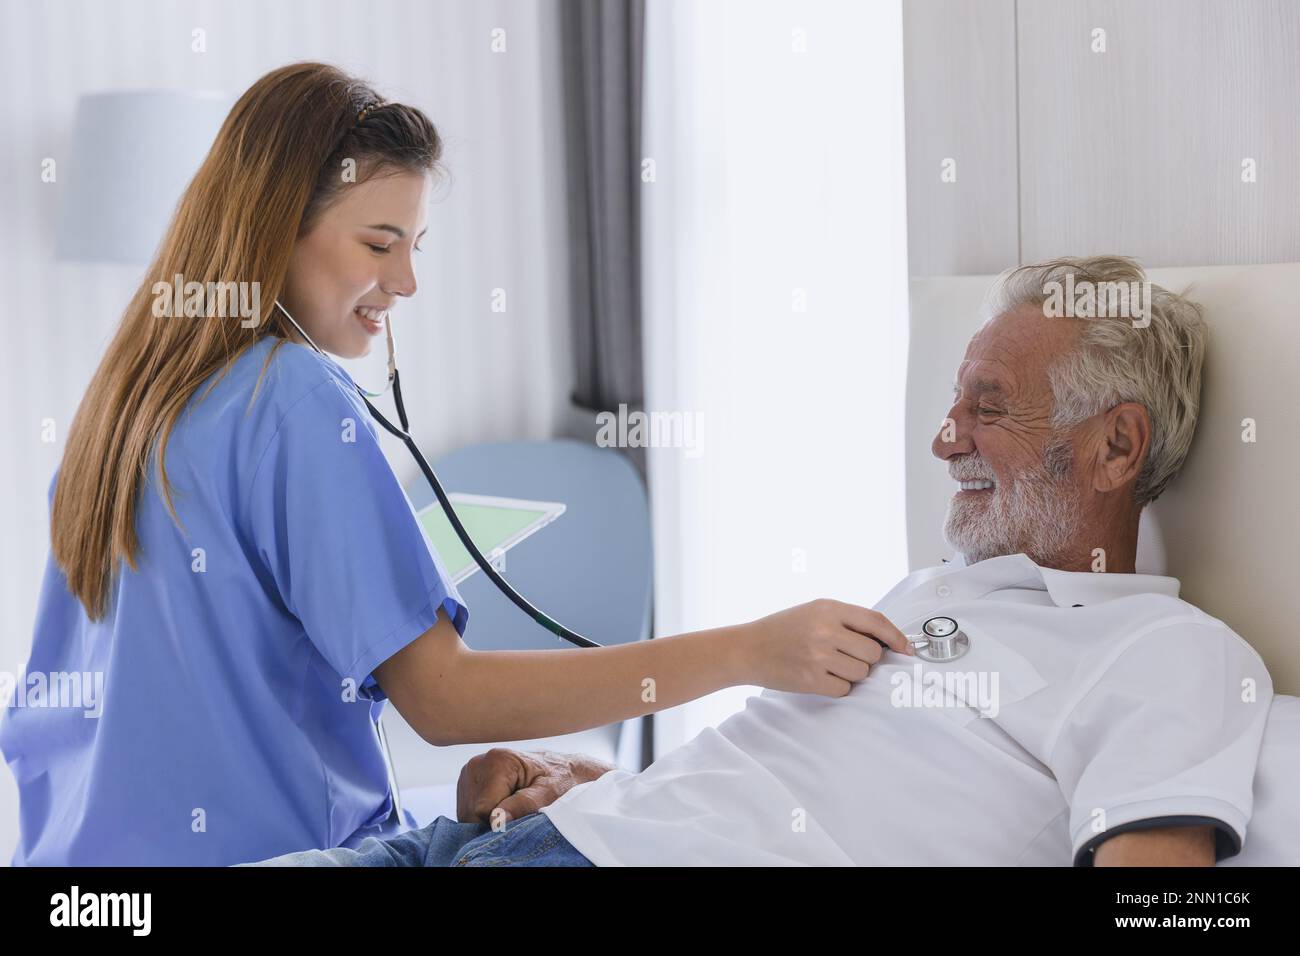 Nurse doctor working at home care medical checkup healthy elderly senior male happy smile Stock Photo